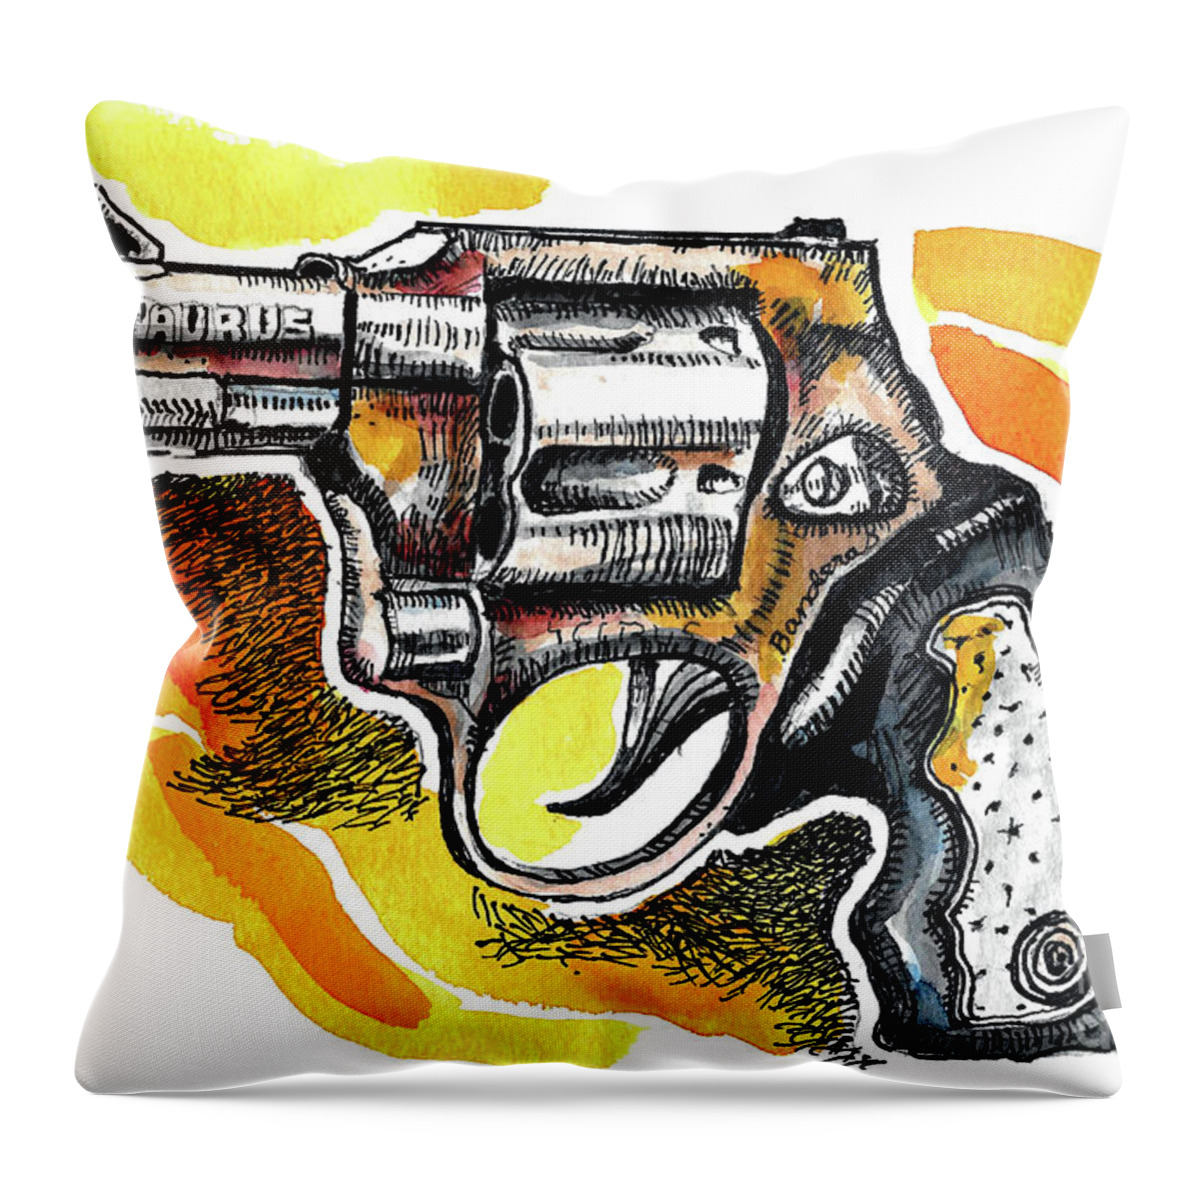 Guns Throw Pillow featuring the painting Not A Toy by Terry Banderas